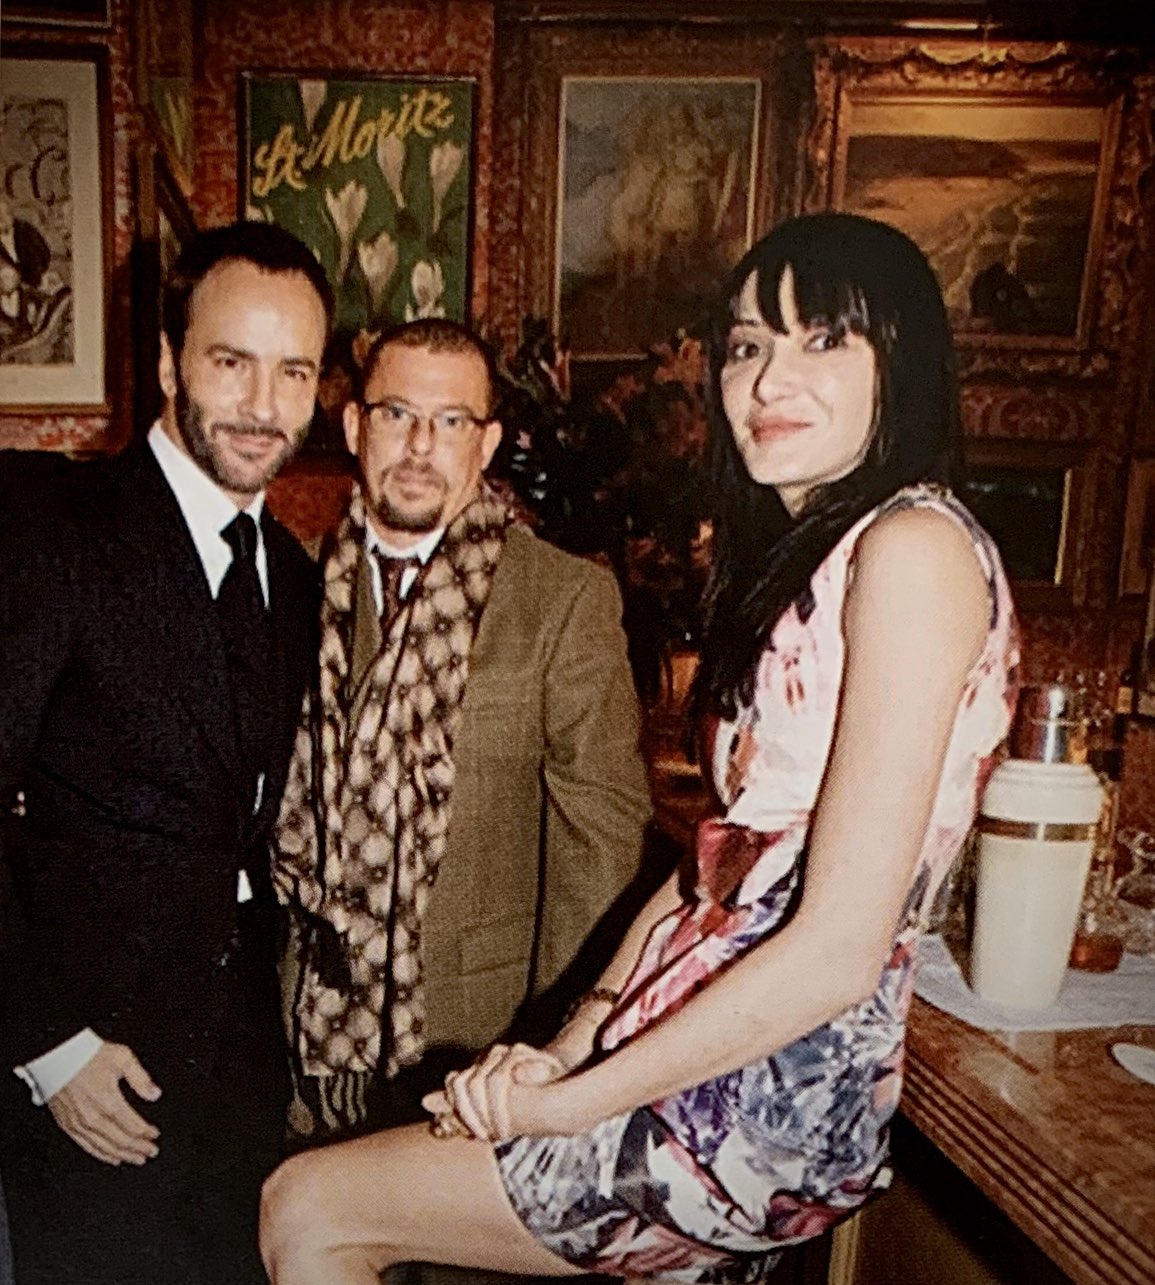 archivealive on X: Tom Ford, Alexander McQueen, and Annabelle Neilson  (muse and best friend to Kate Moss) at Harry's Bar in London (February  2010)